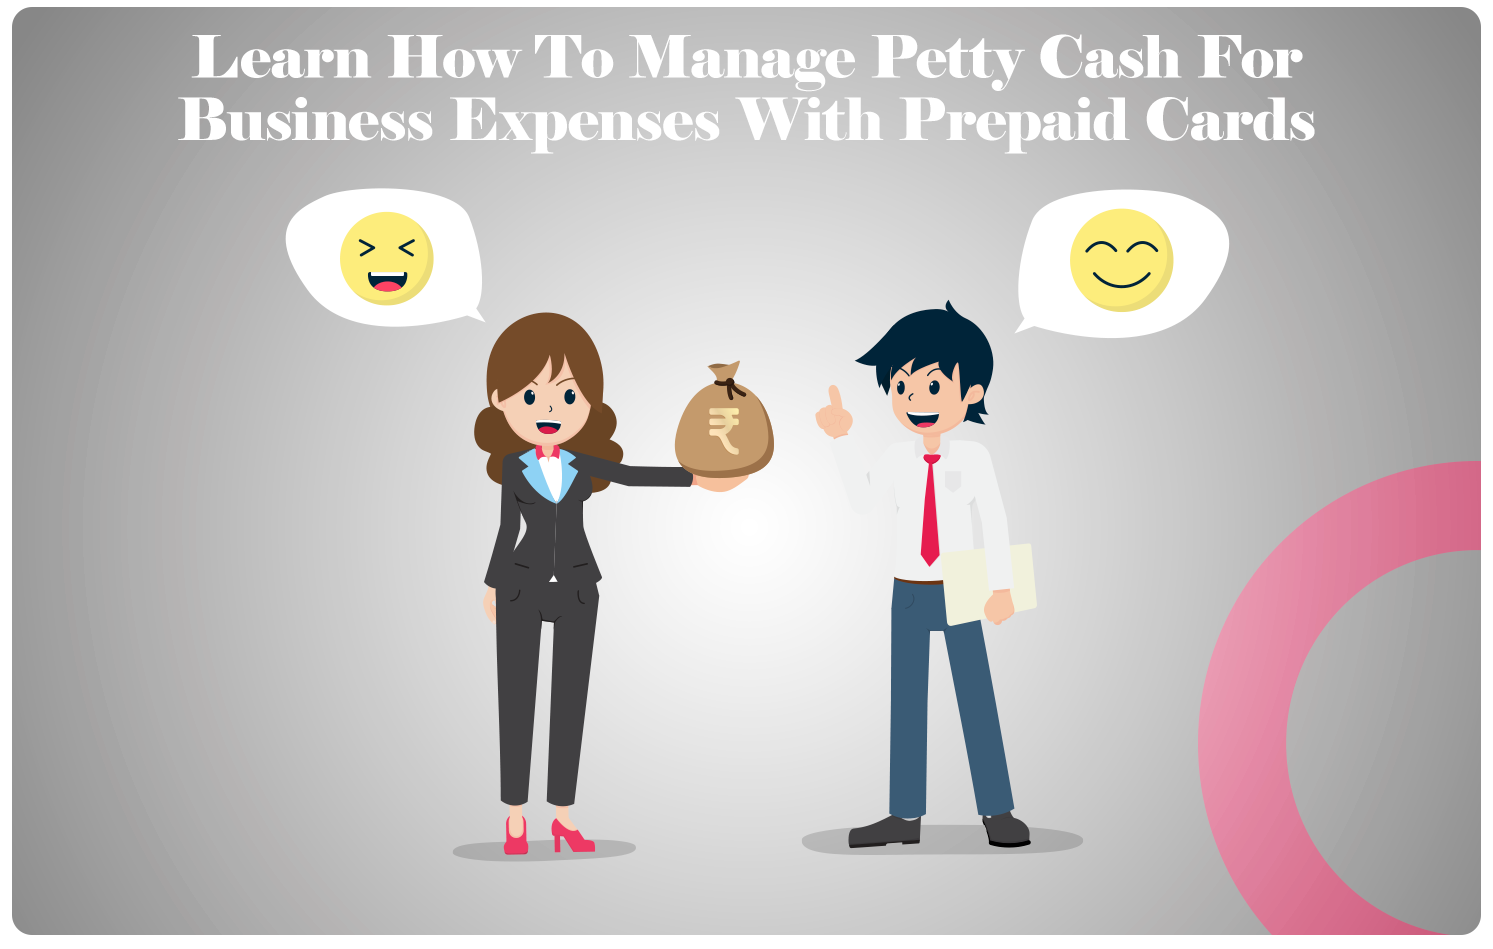 Learn How To Manage Petty Cash For Business Expenses With Prepaid Cards